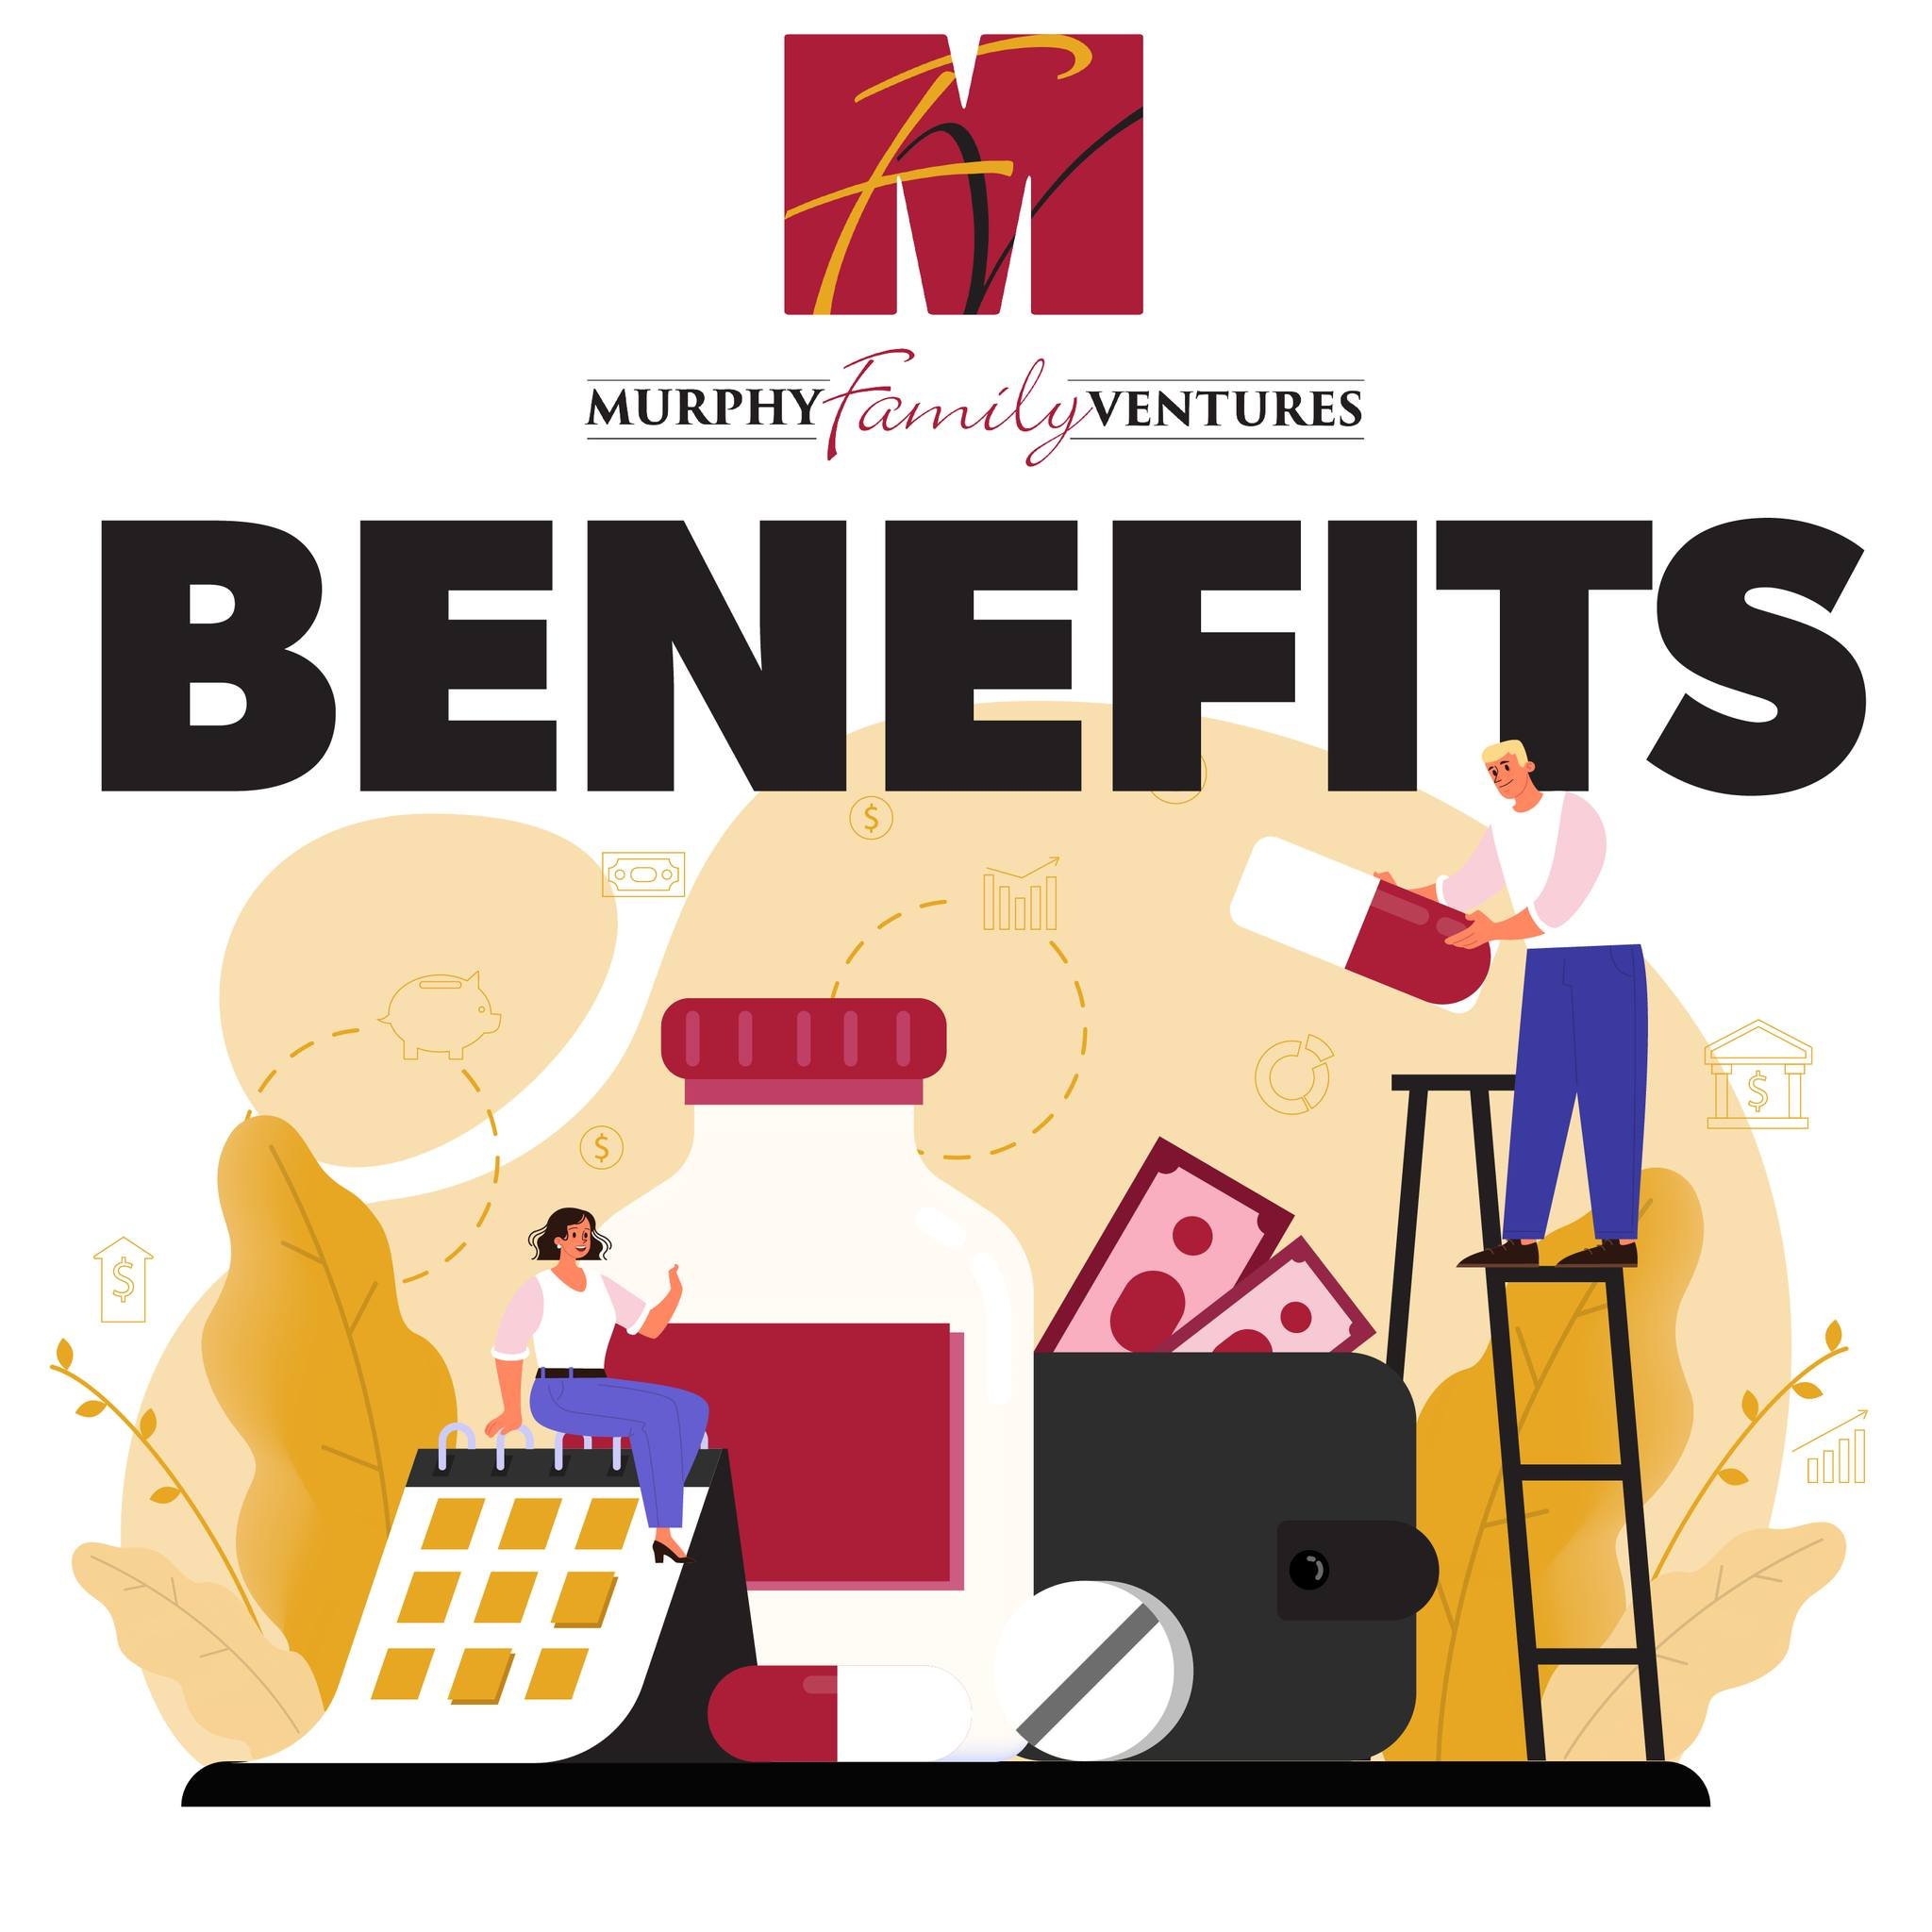 Today, on Life Insurance Day, let's take a moment to appreciate the protection that it offers you and your family. There are many benefits of working at Murphy Family Ventures: access to a 24/7 online medical service and a comprehensive benefits pack